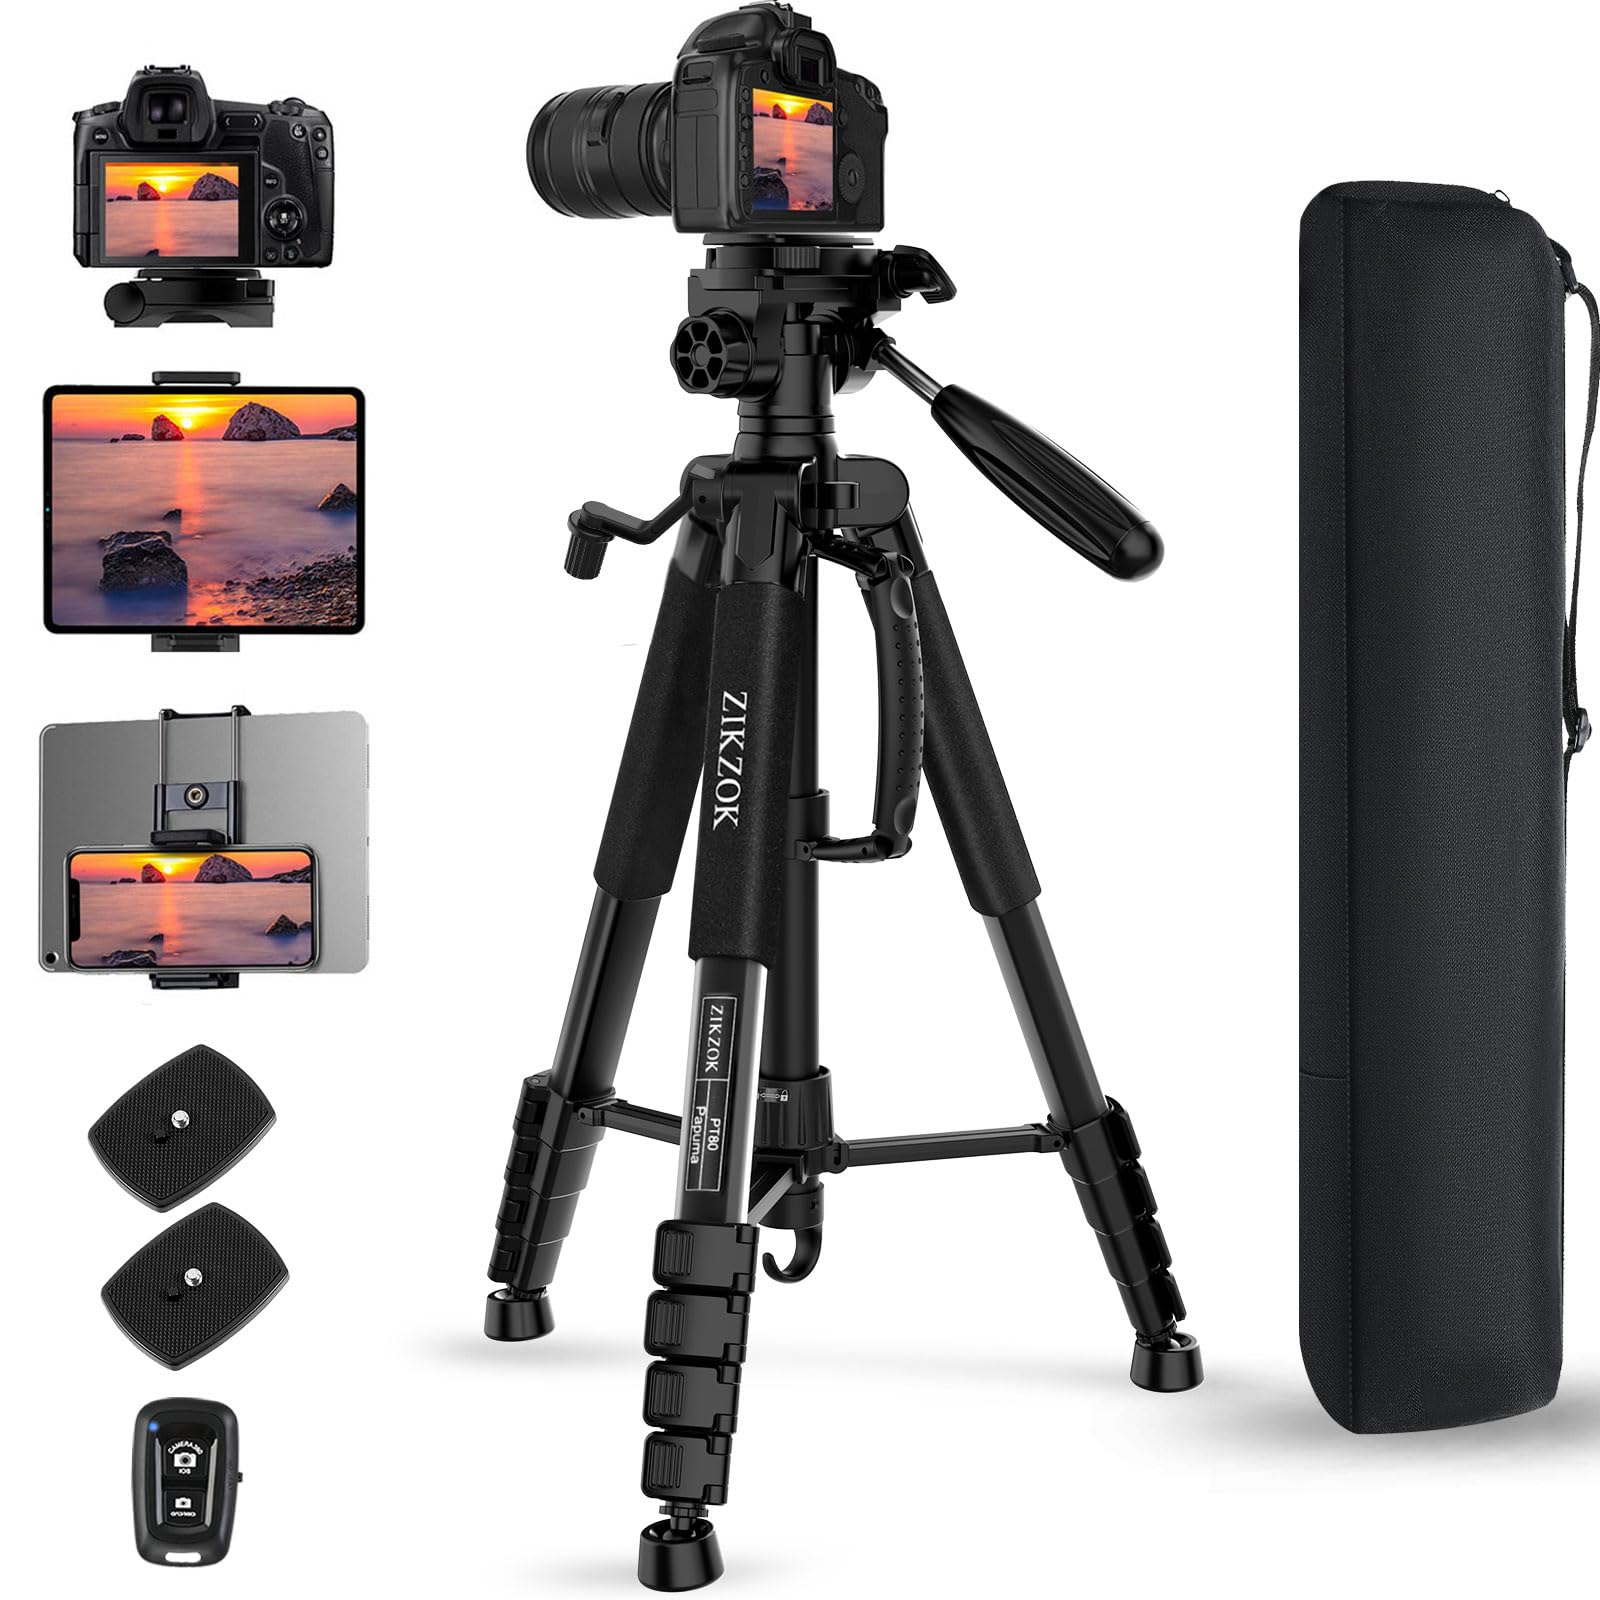 ZIKZOK 75 Inch Camera Tripod, Lightweight Travel Aluminum Cell Phone Video Tripod for DSLR/SLR/DV/GoPro/iPhone with Bag (Weight 2.8Lbs/Load 11Lbs)